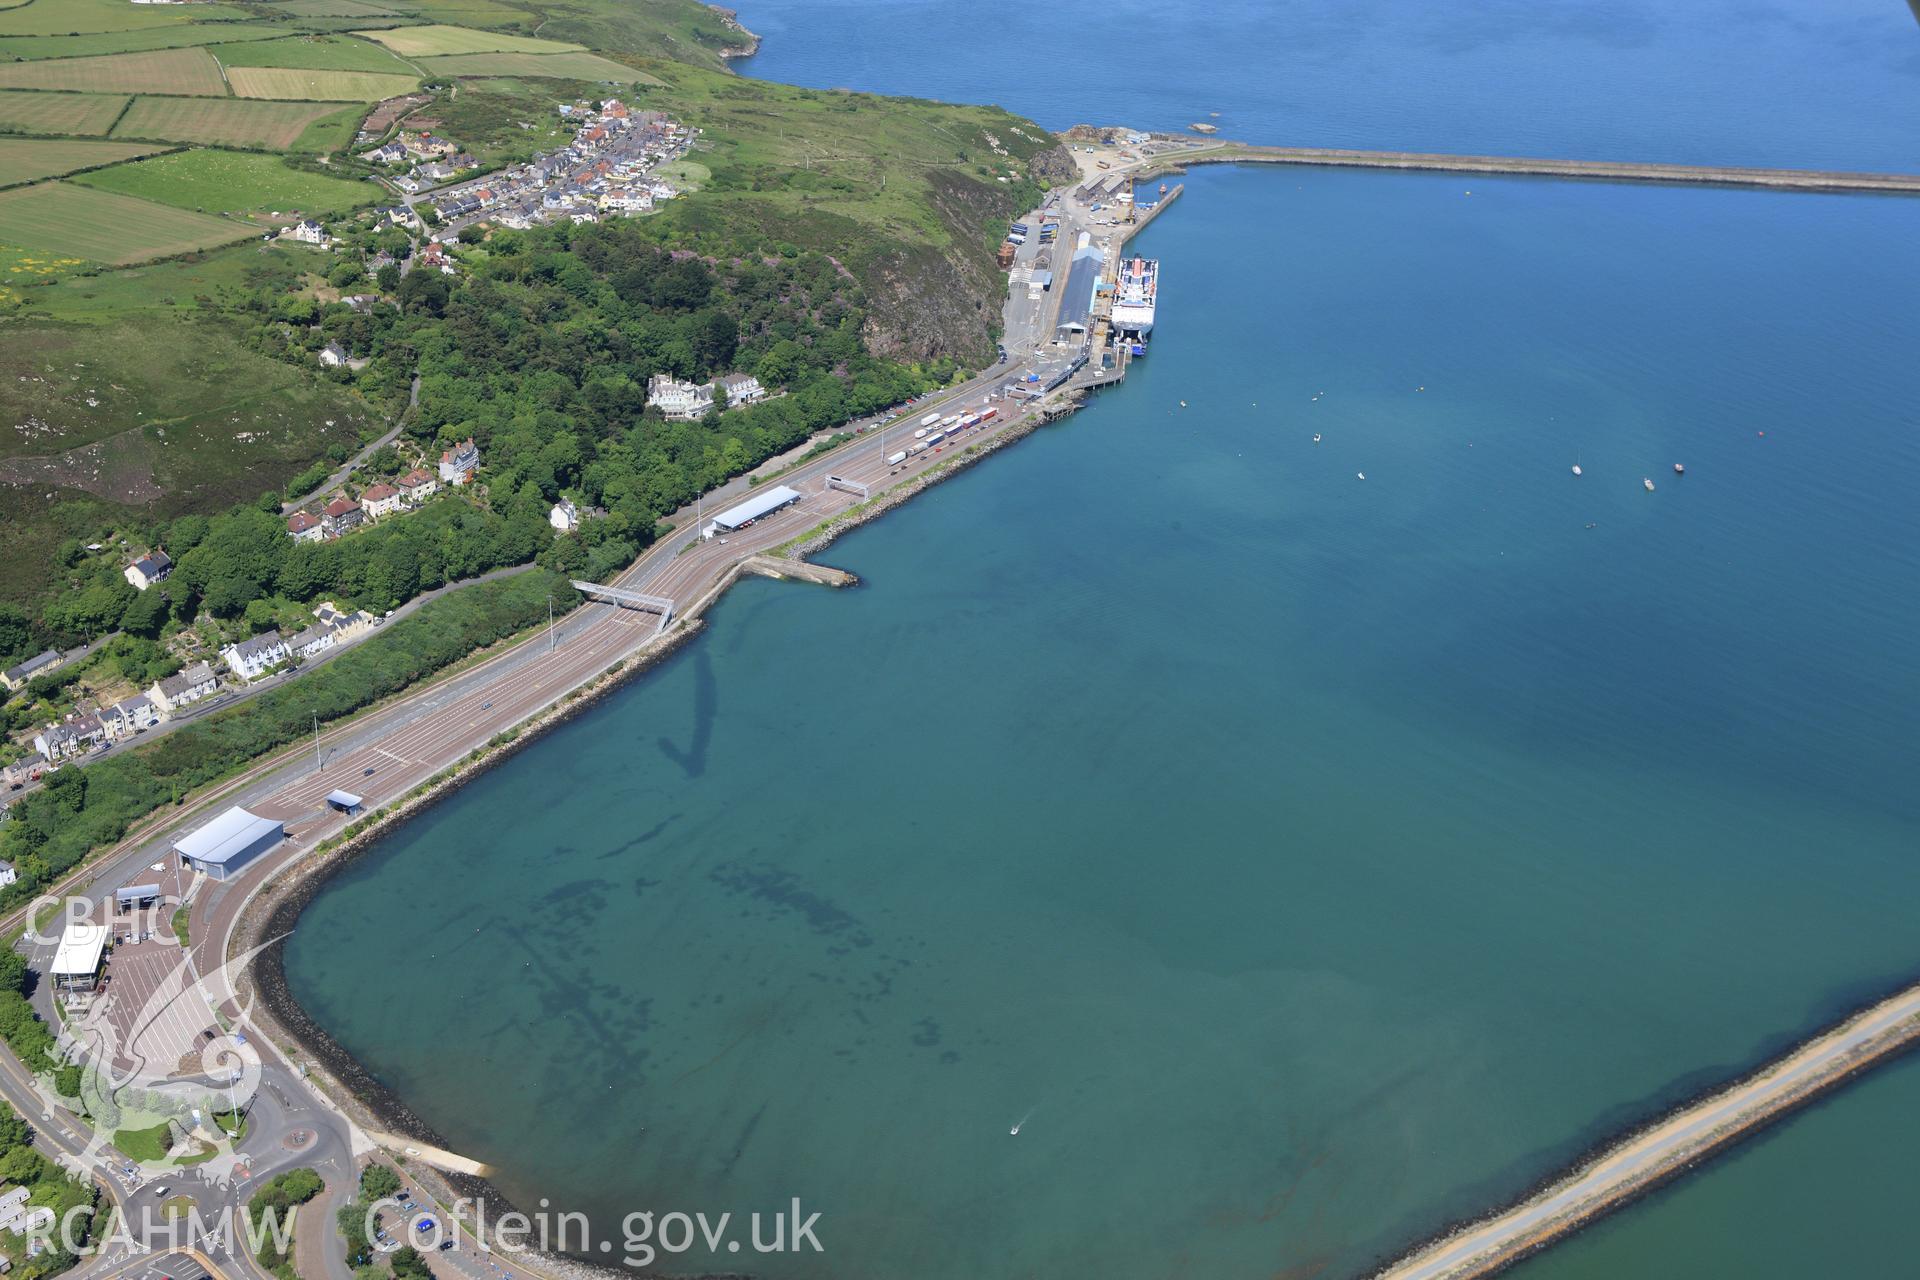 RCAHMW colour oblique aerial photograph of Fishguard Harbour North-West Fish Trap. Taken on 01 June 2009 by Toby Driver